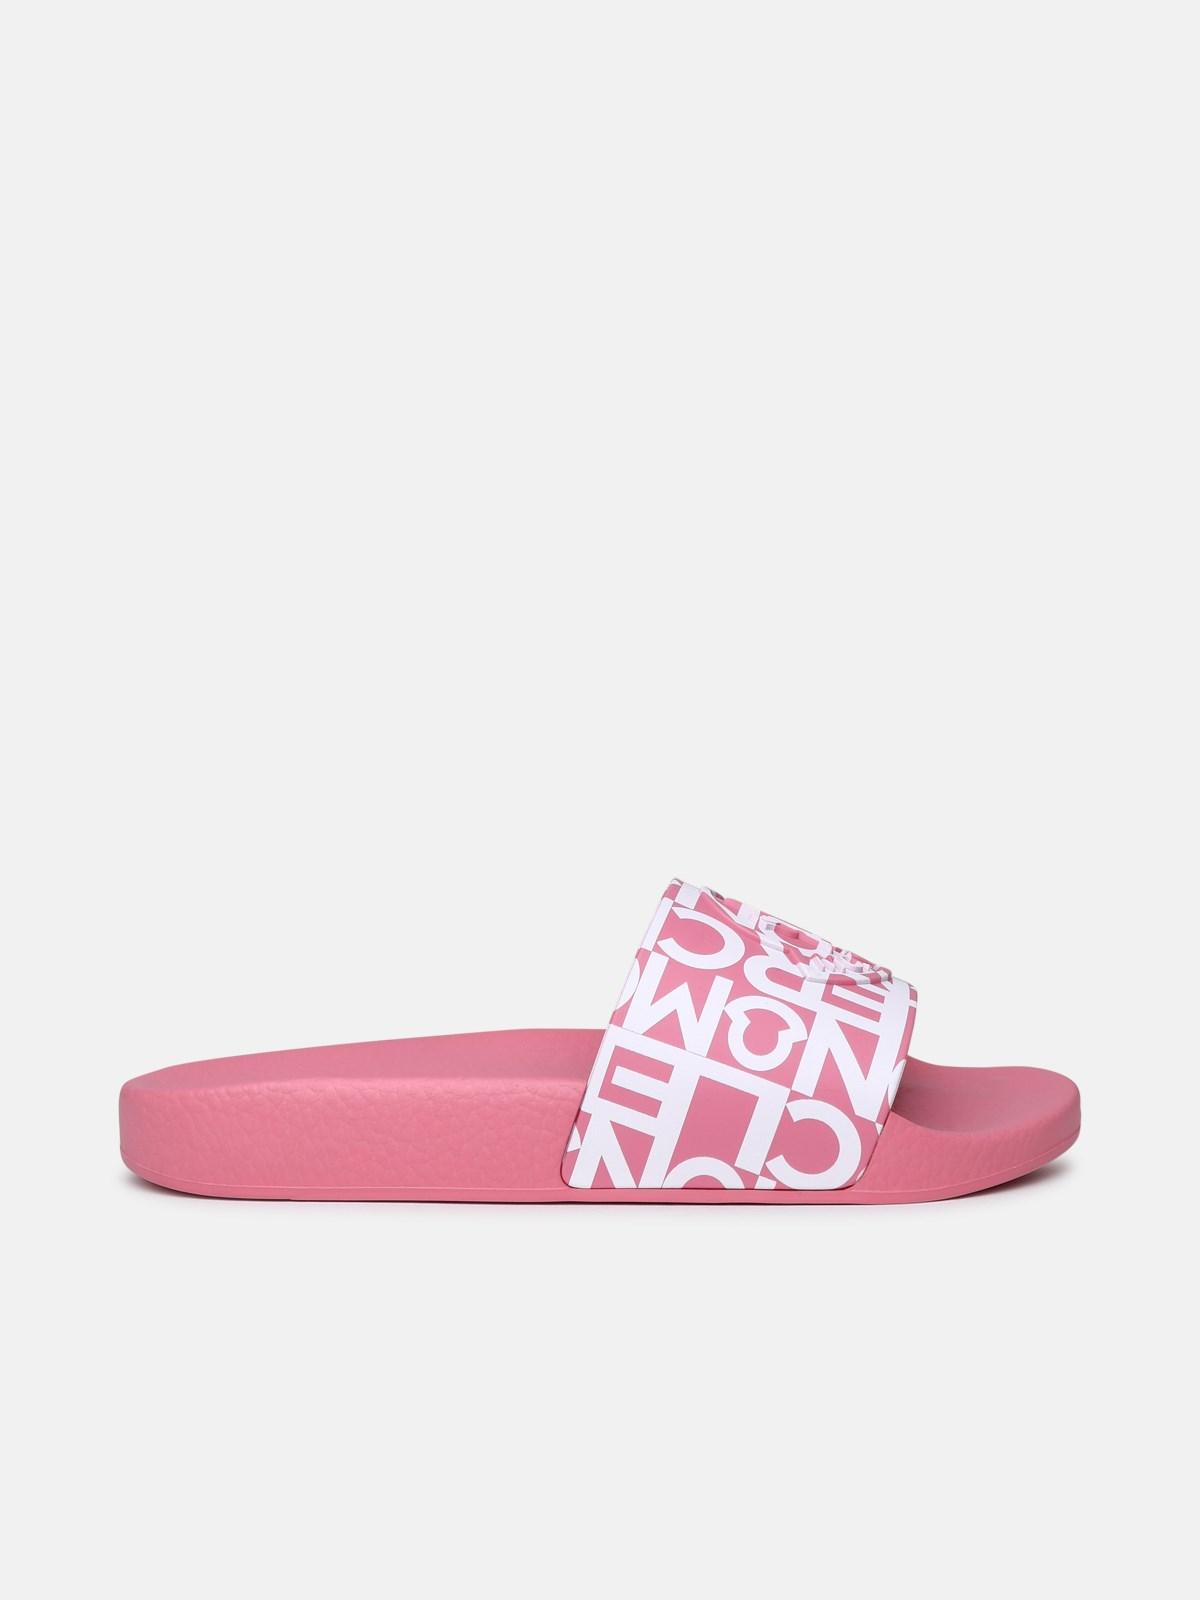 Moncler Jane Rose Rubber Slippers in Pink | Lyst